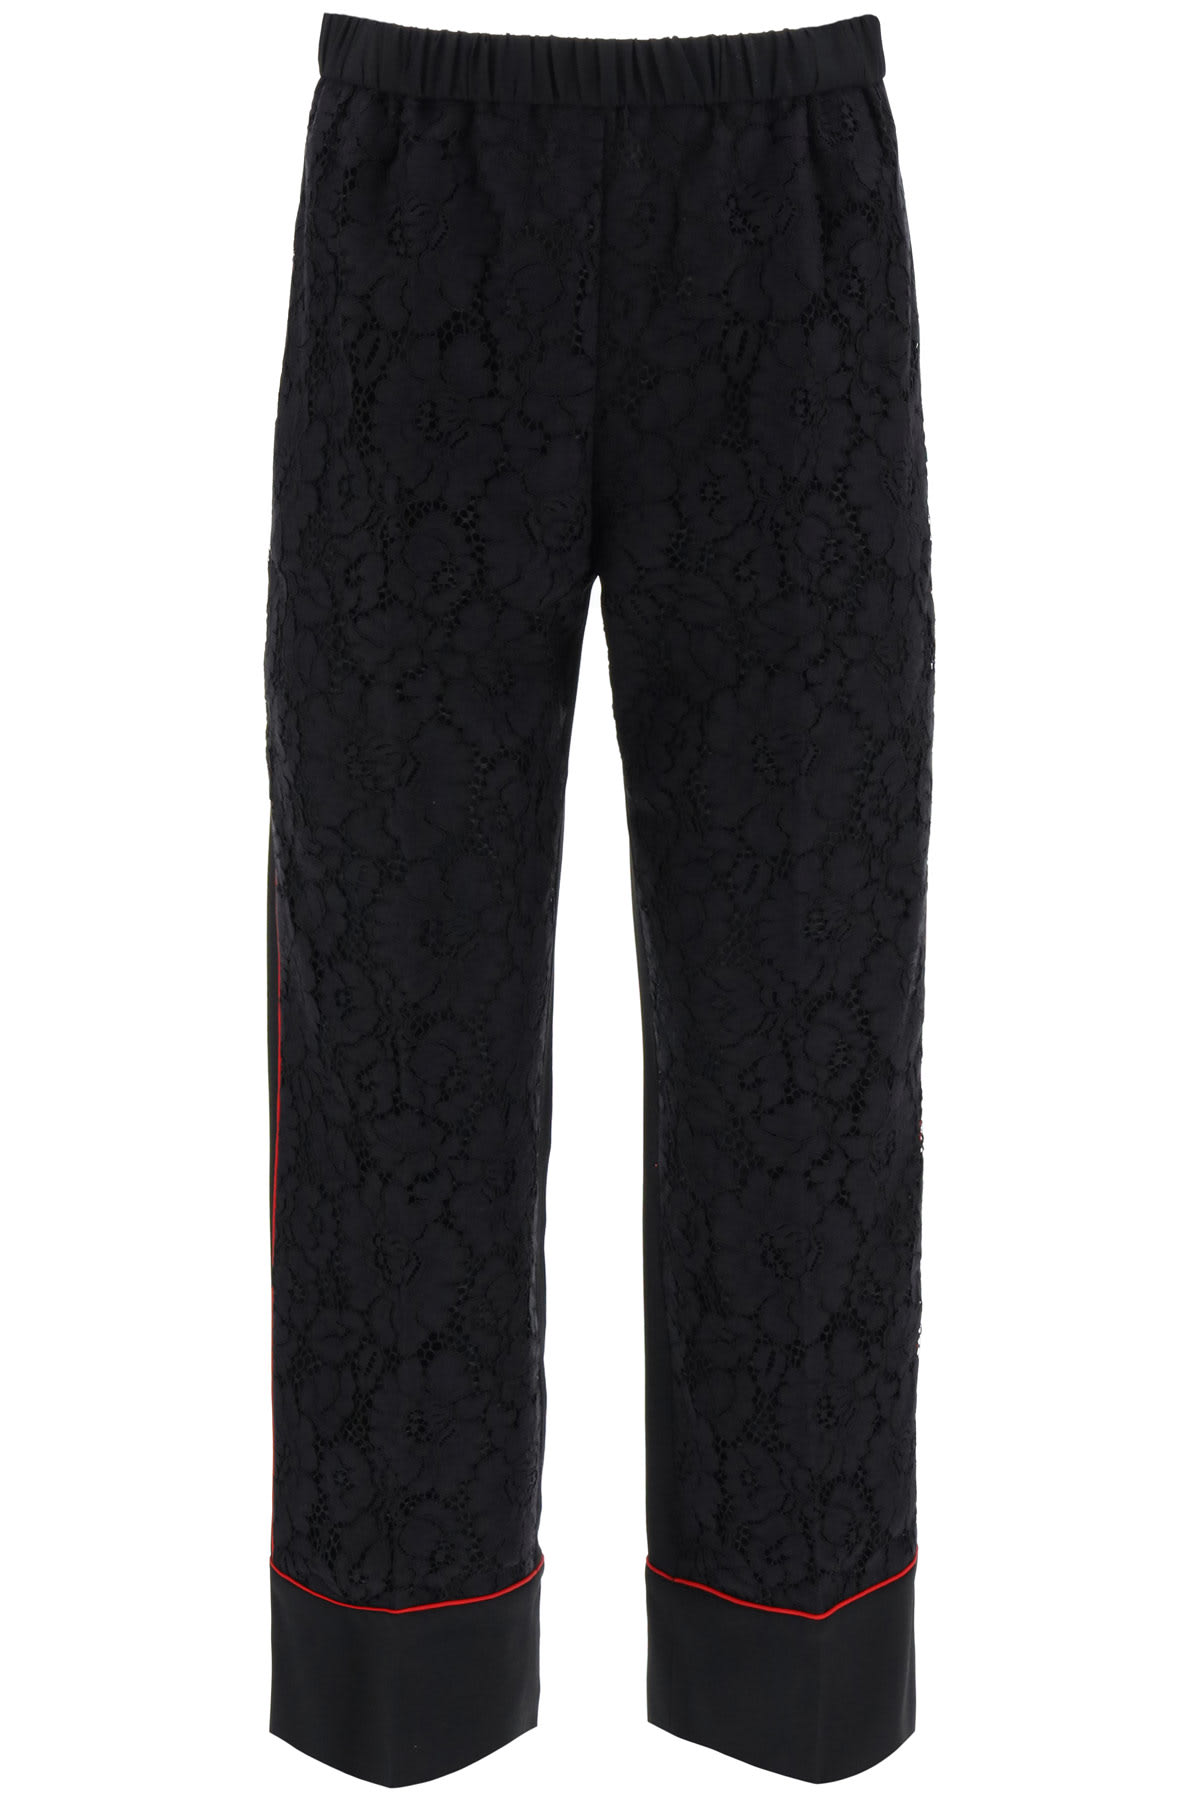 N.21 Cropped Trousers With Lace